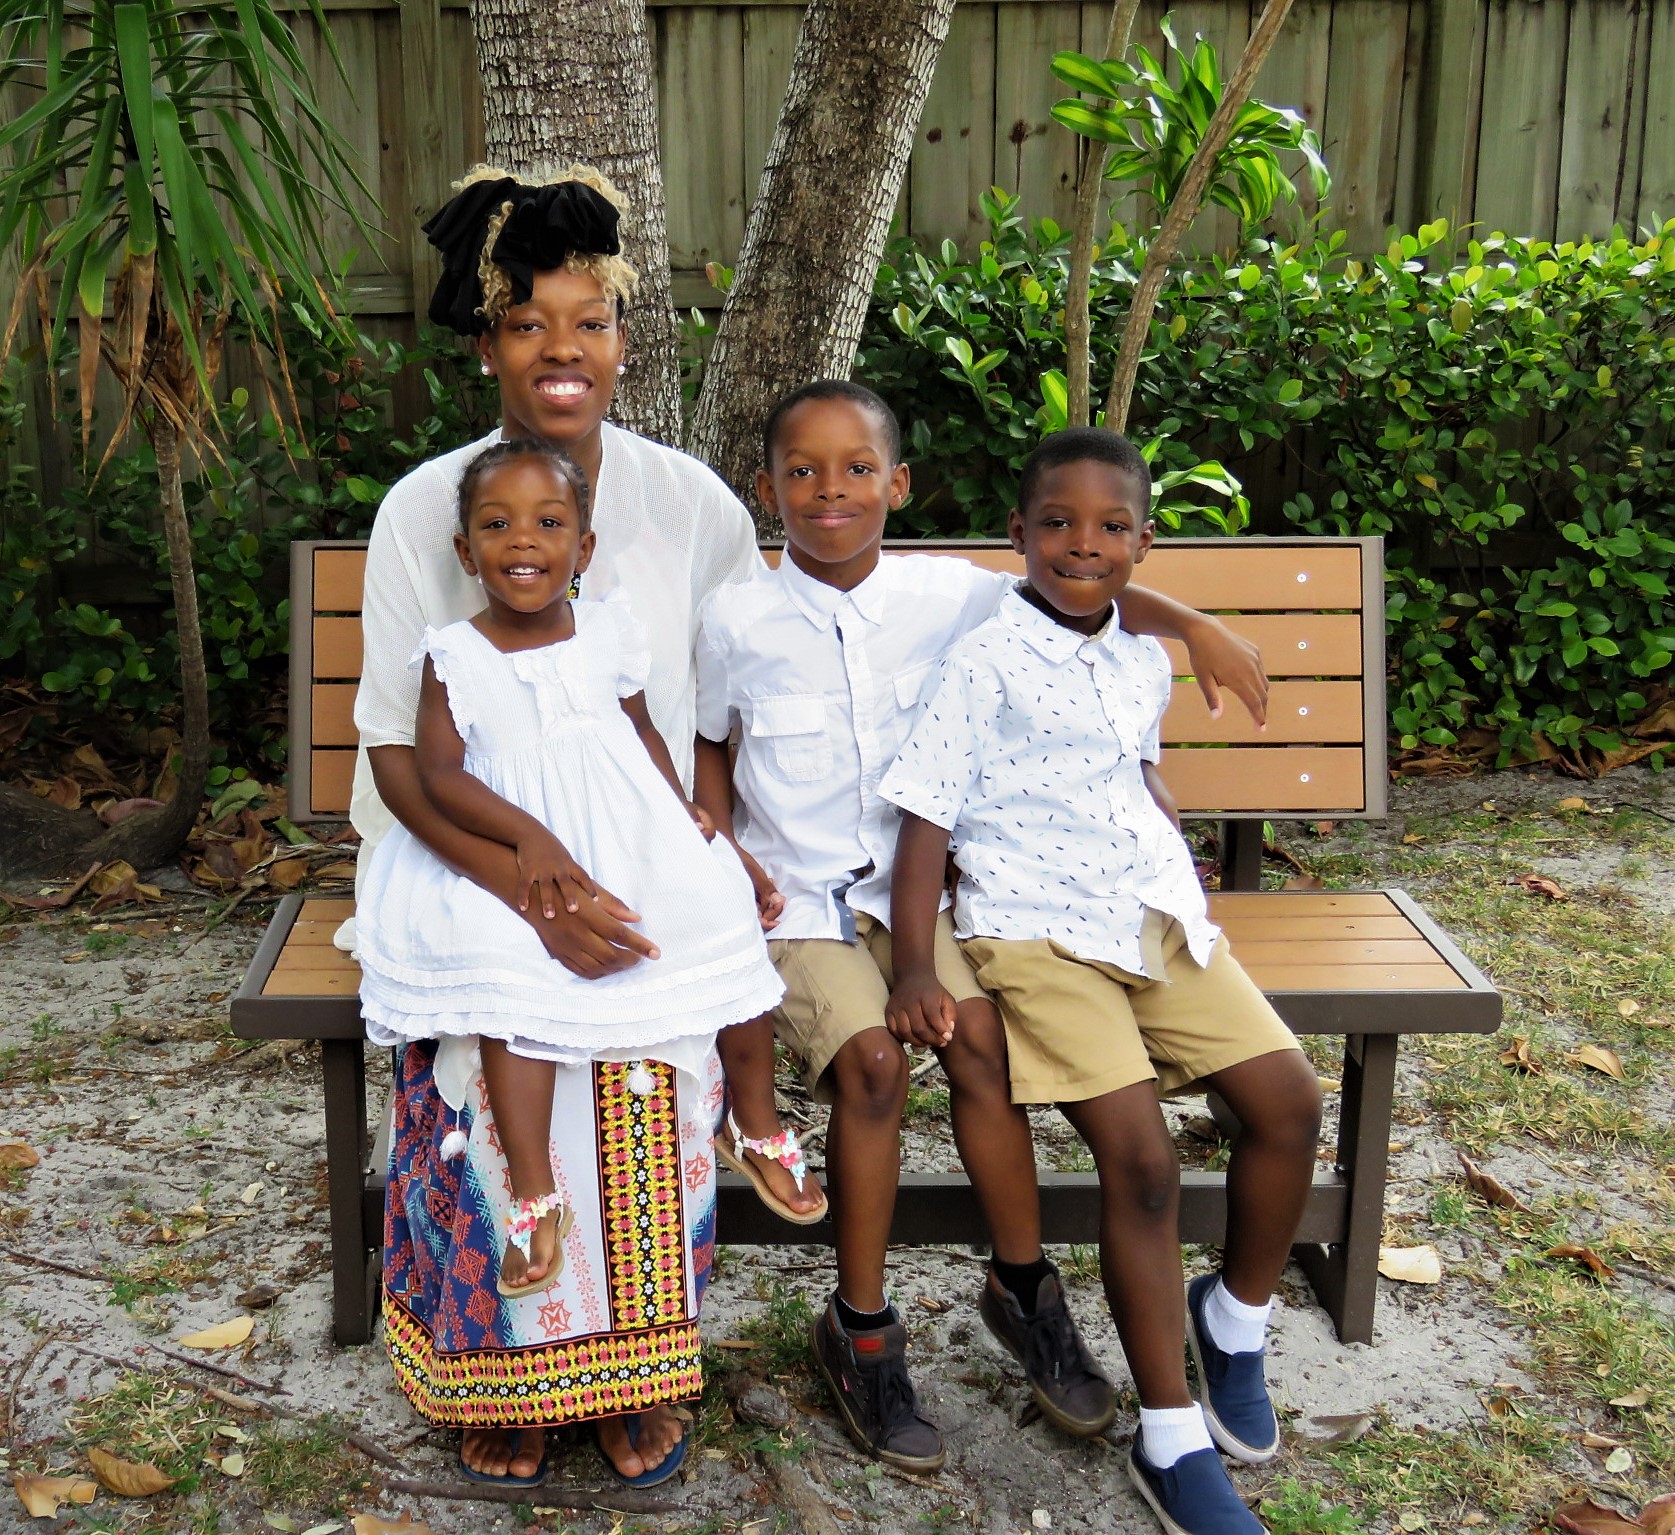 Client and her three kids sitting on a bench